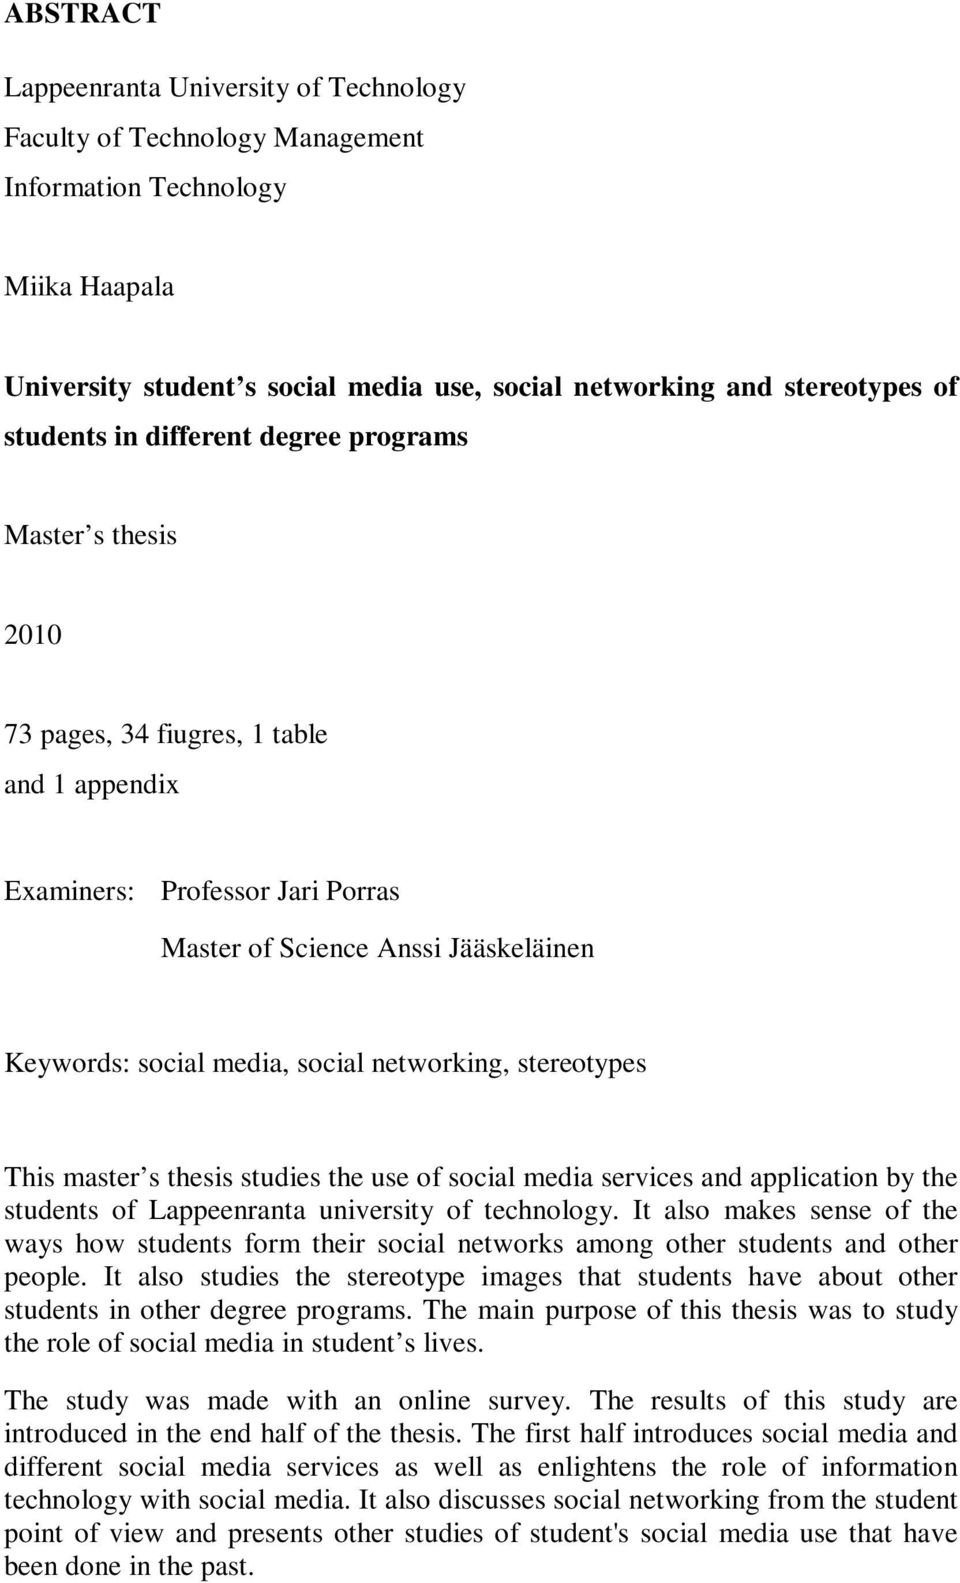 social networking, stereotypes This master s thesis studies the use of social media services and application by the students of Lappeenranta university of technology.